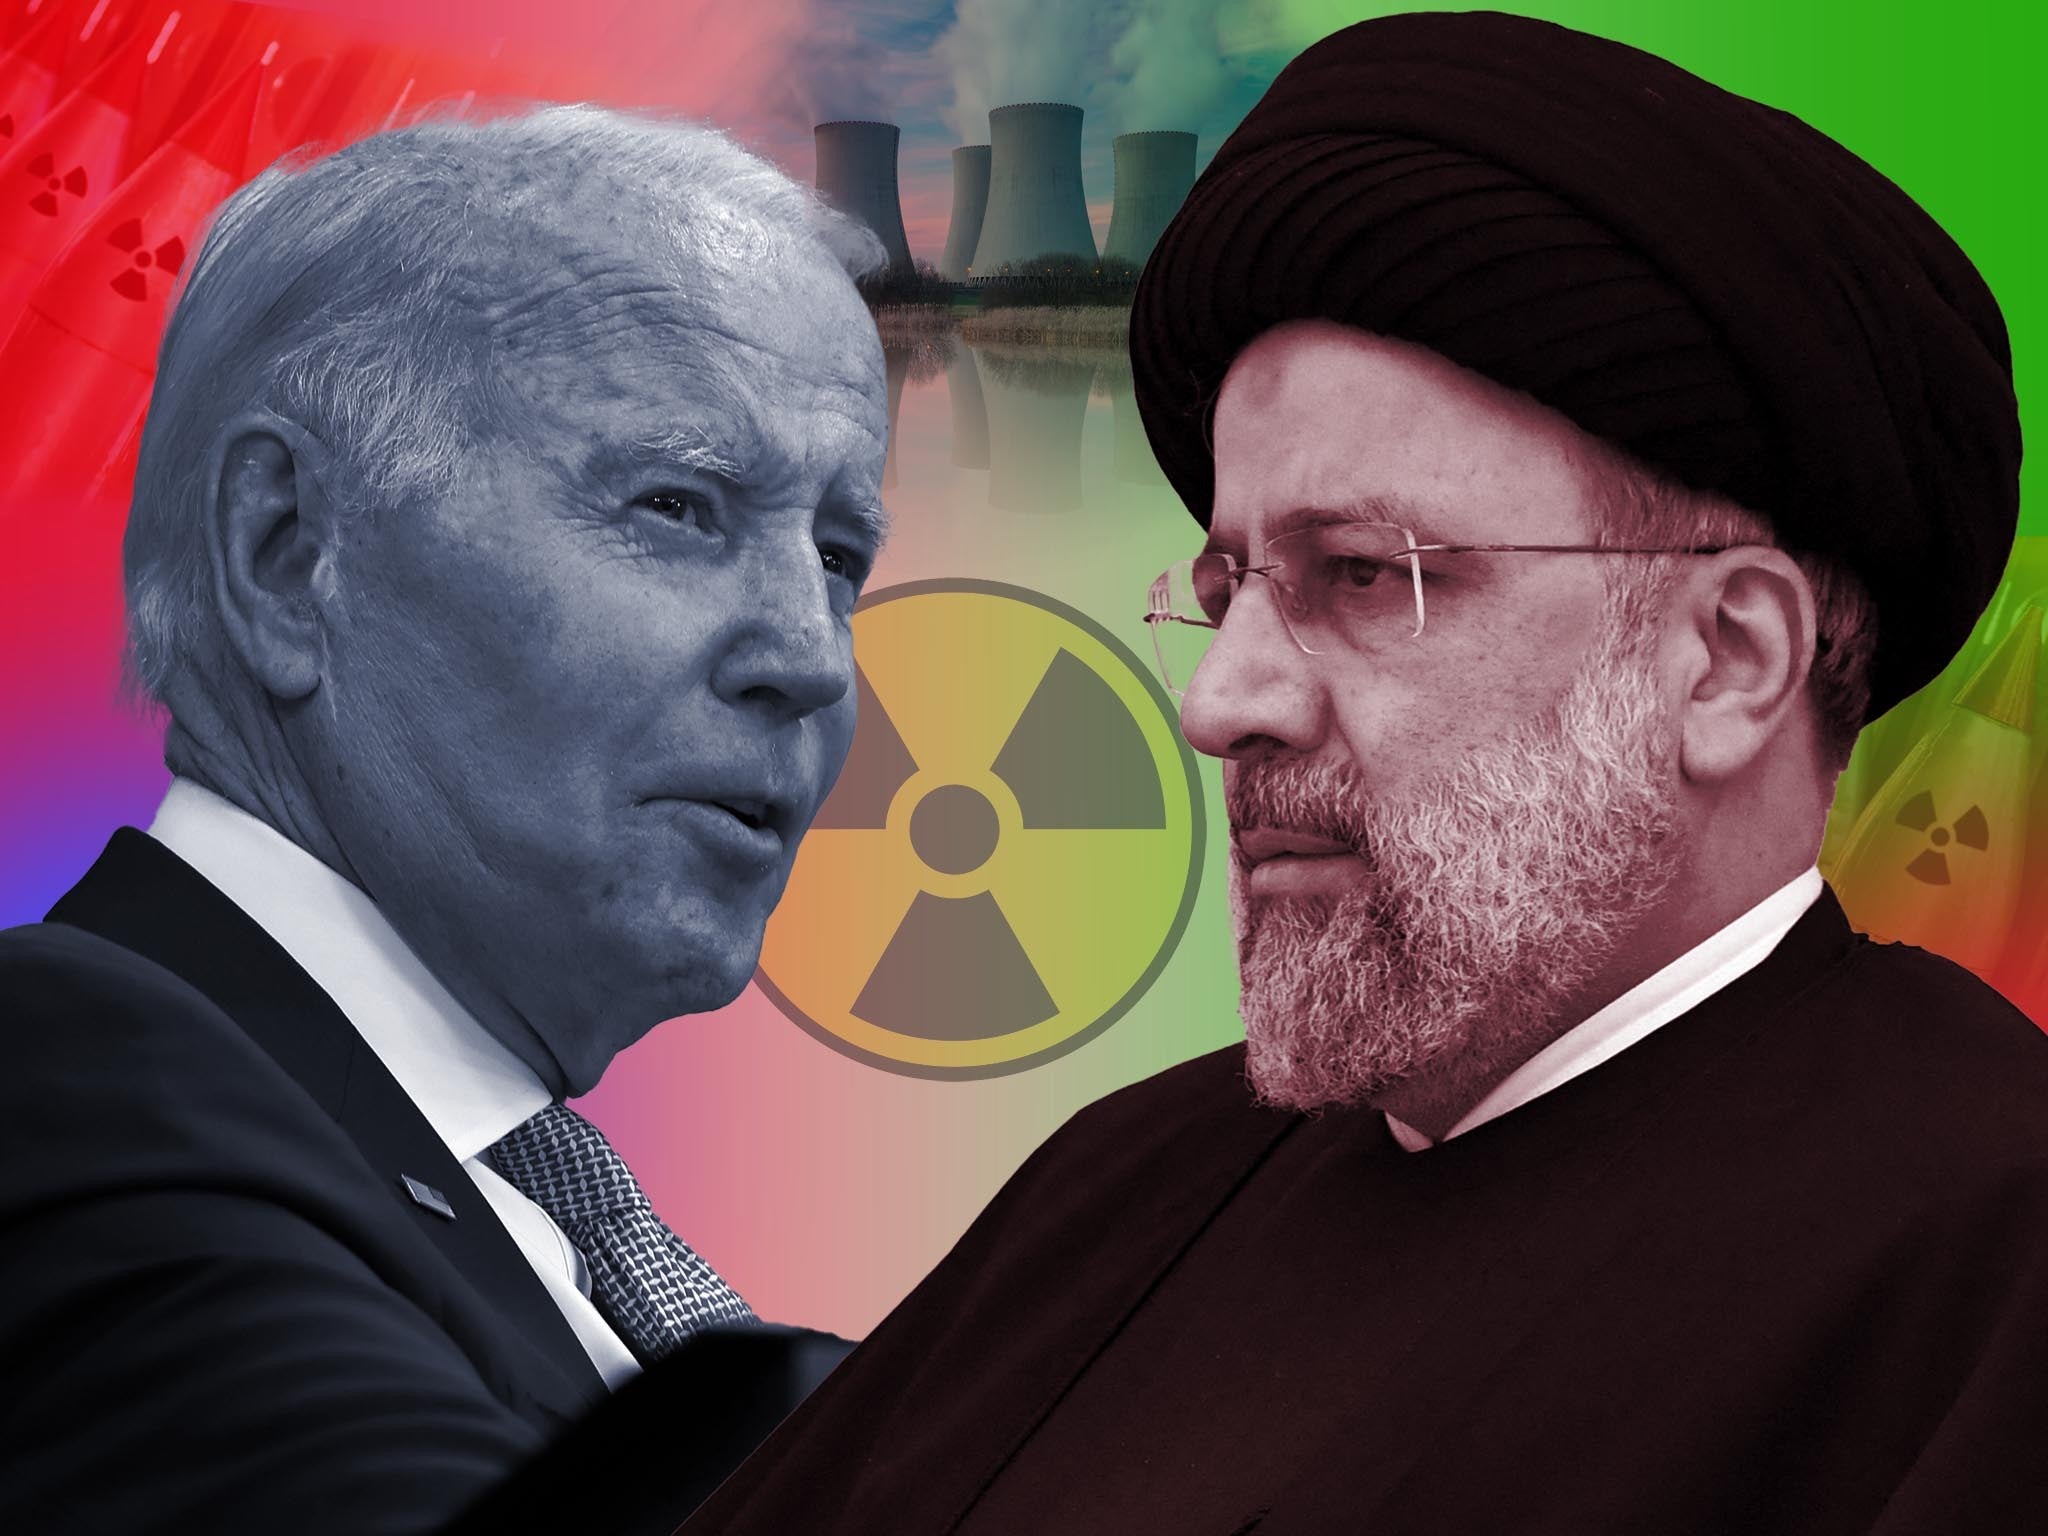 Experts and diplomats say the US and Iran are closer than ever to returning to the deal